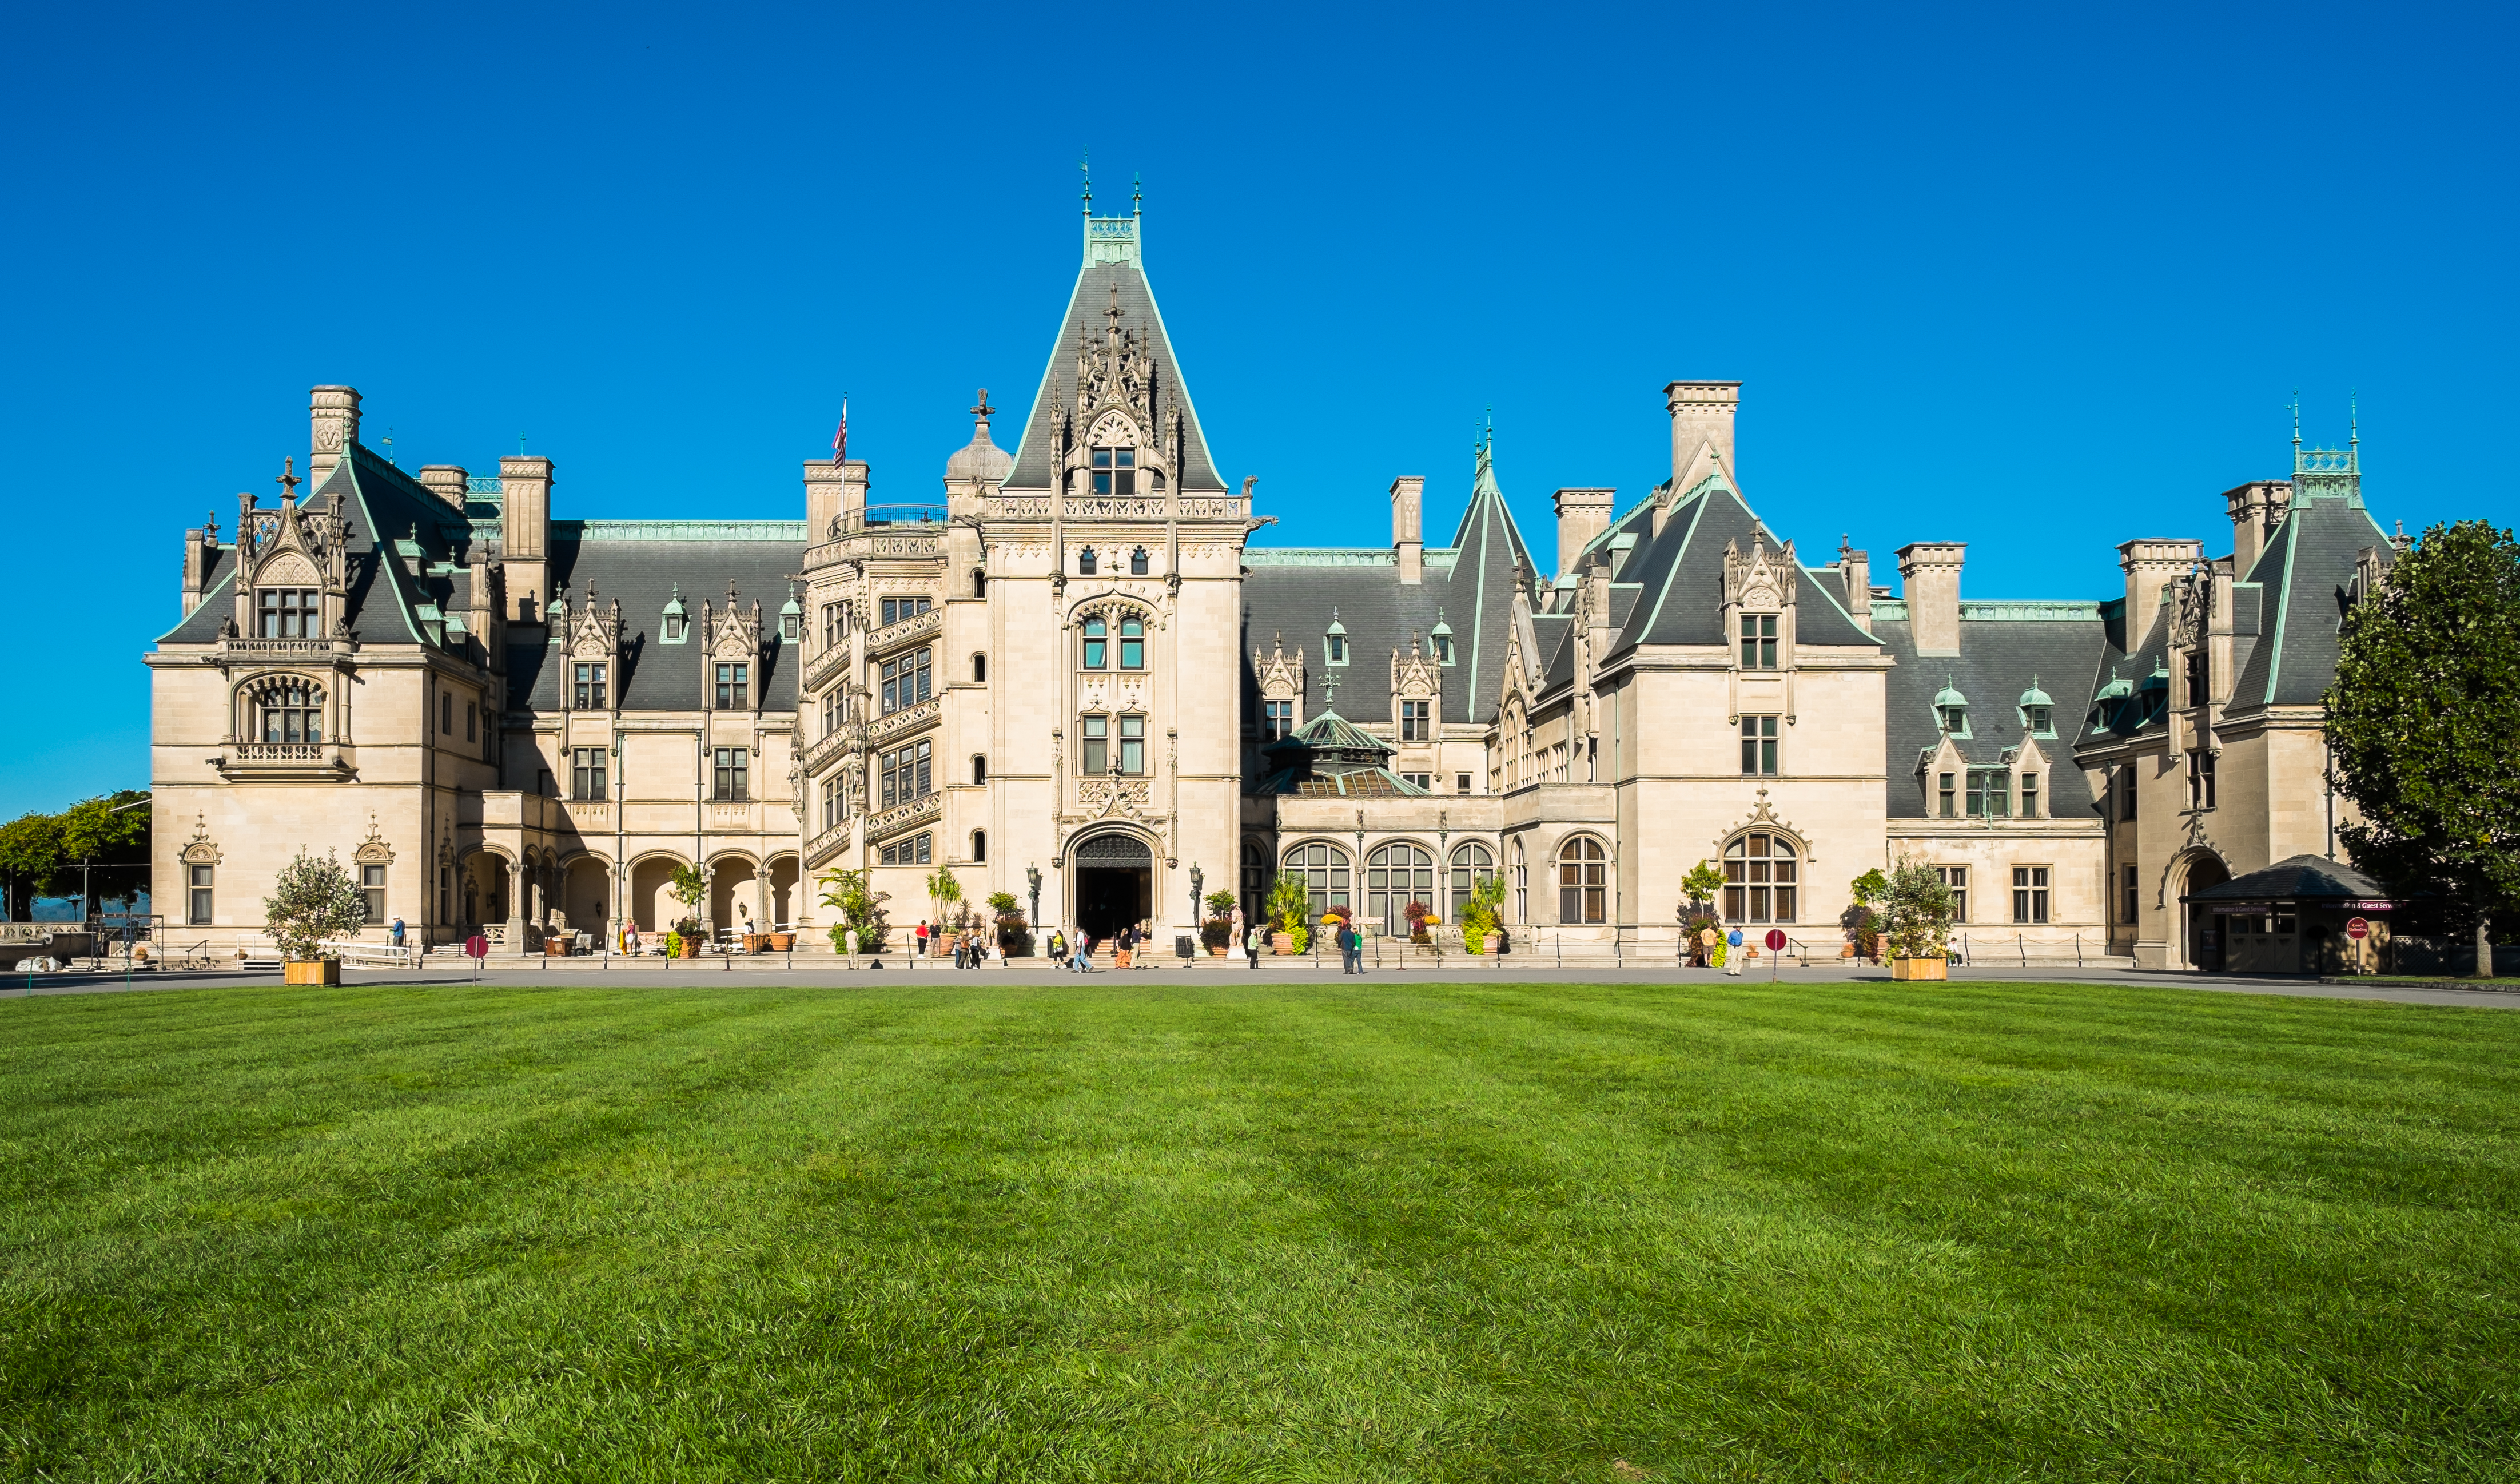 Best Things to Do in Asheville - Biltmore Estate